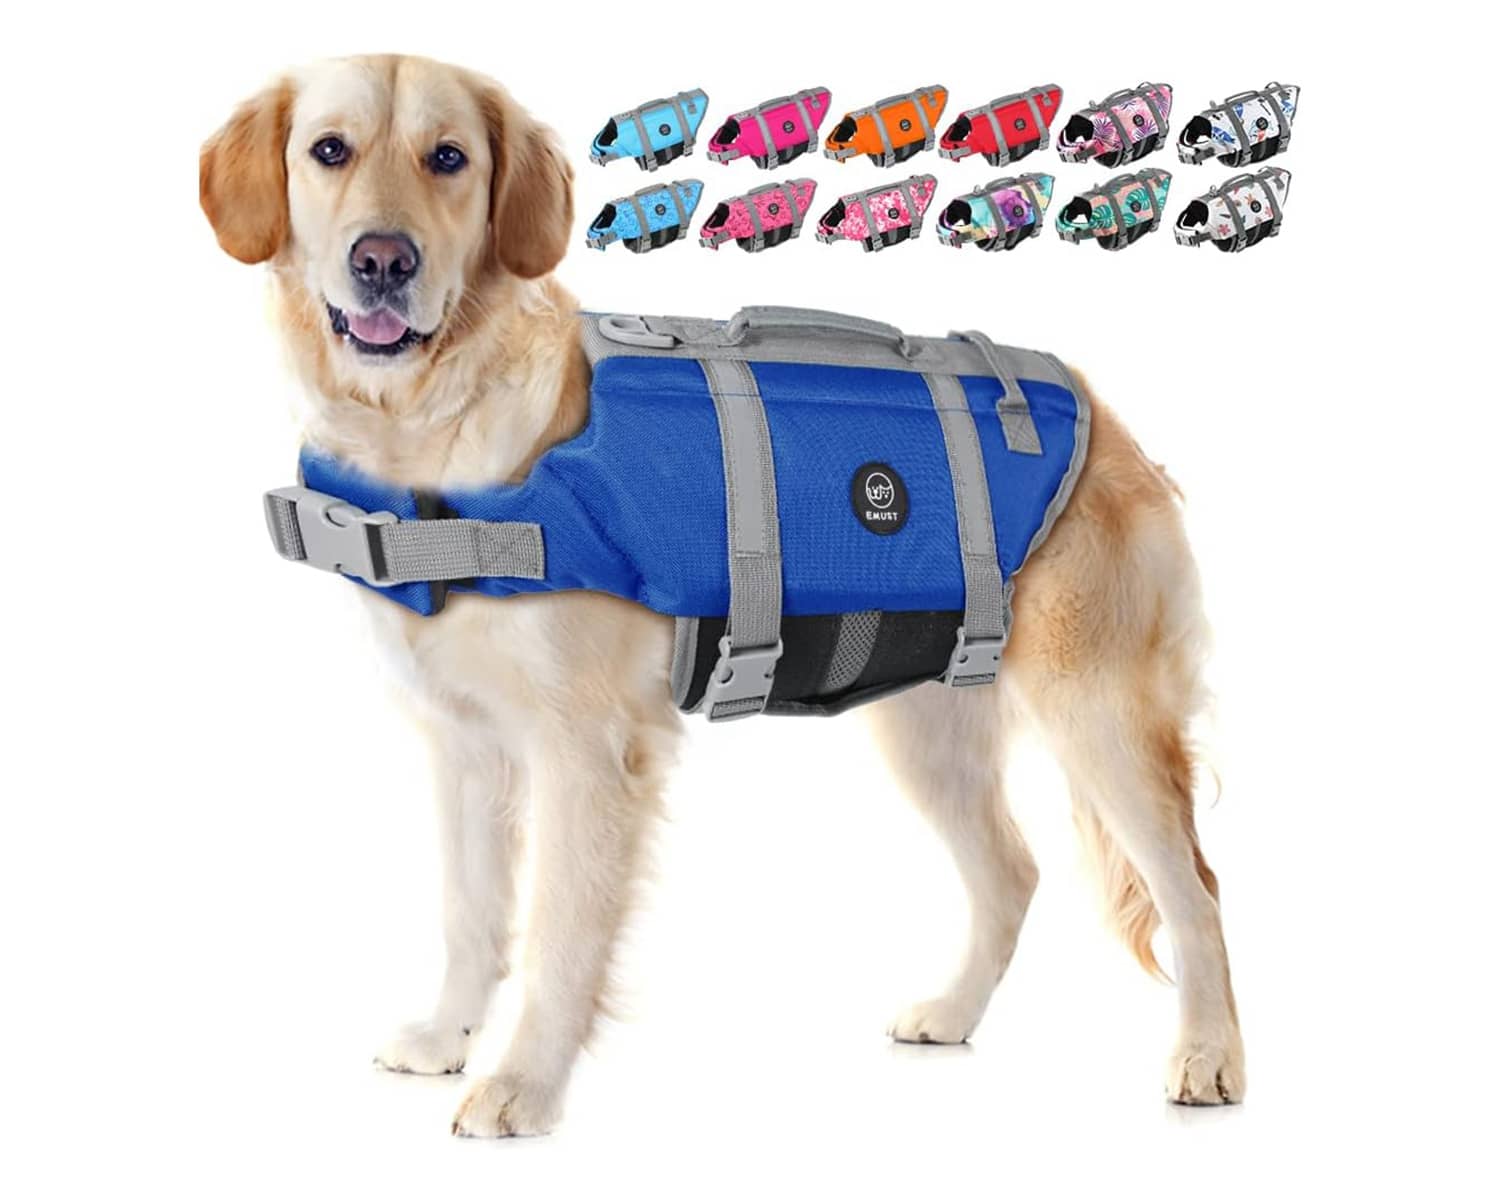 EMUST Dog Life Jackets, Dog Life Vests for Swimming,Boating with High Buoyancy, Dog Life Preserver for Small/Medium/Large Dogs, S, Royal Blue